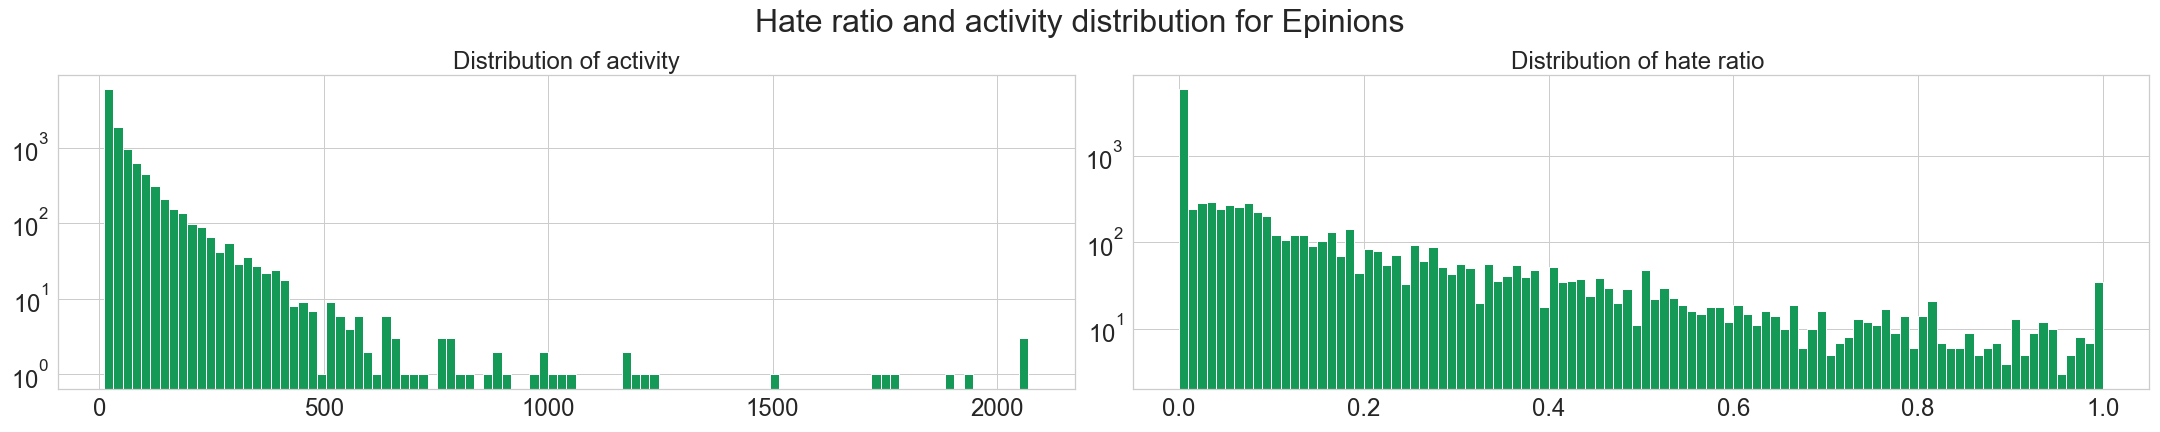 Distribution of activity and hate ratio for Epinions